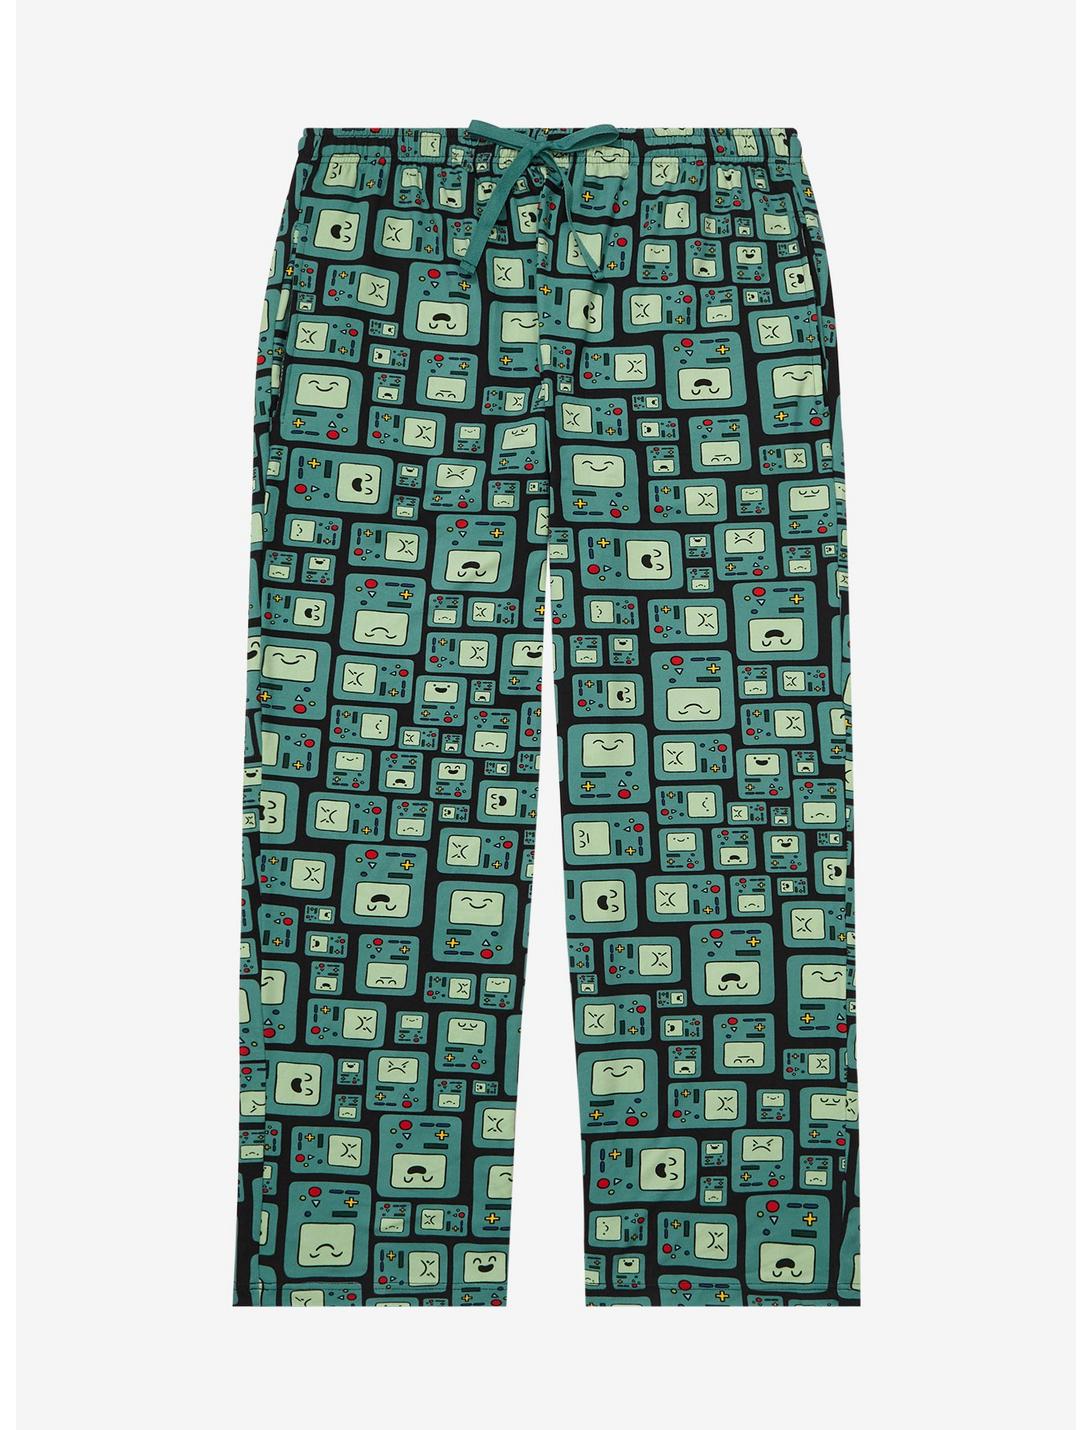 Adventure Time BMO Allover Print Plus Size Sleep Pants - BoxLunch Exclusive, BLACK, hi-res